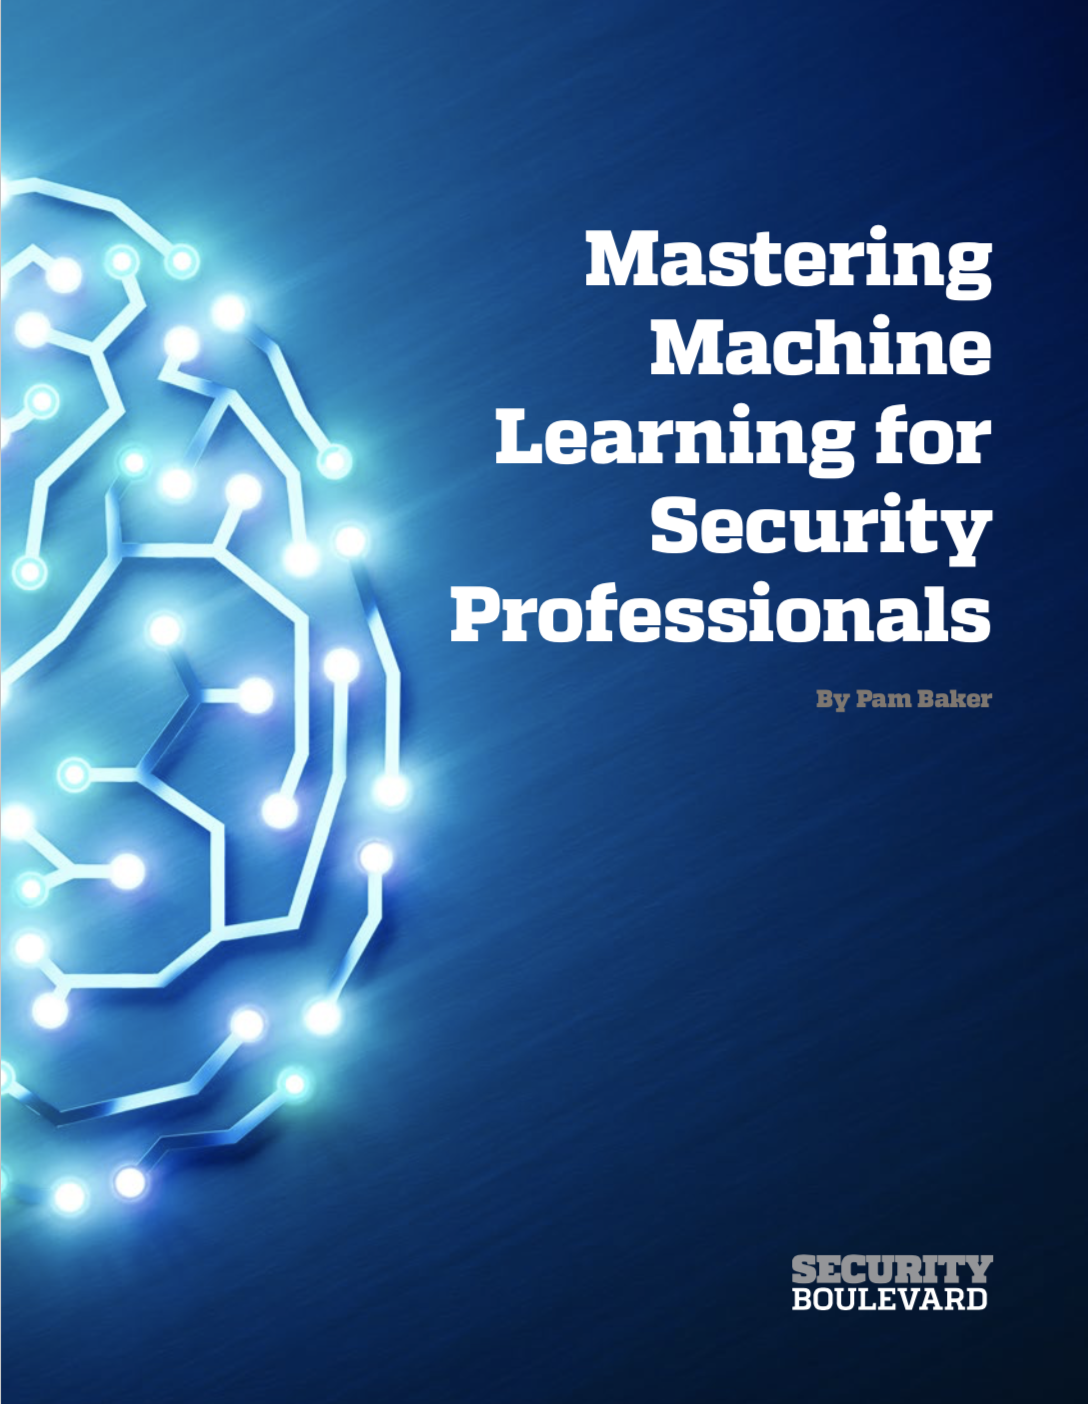 Mastering Machine Learning for Security Professionals